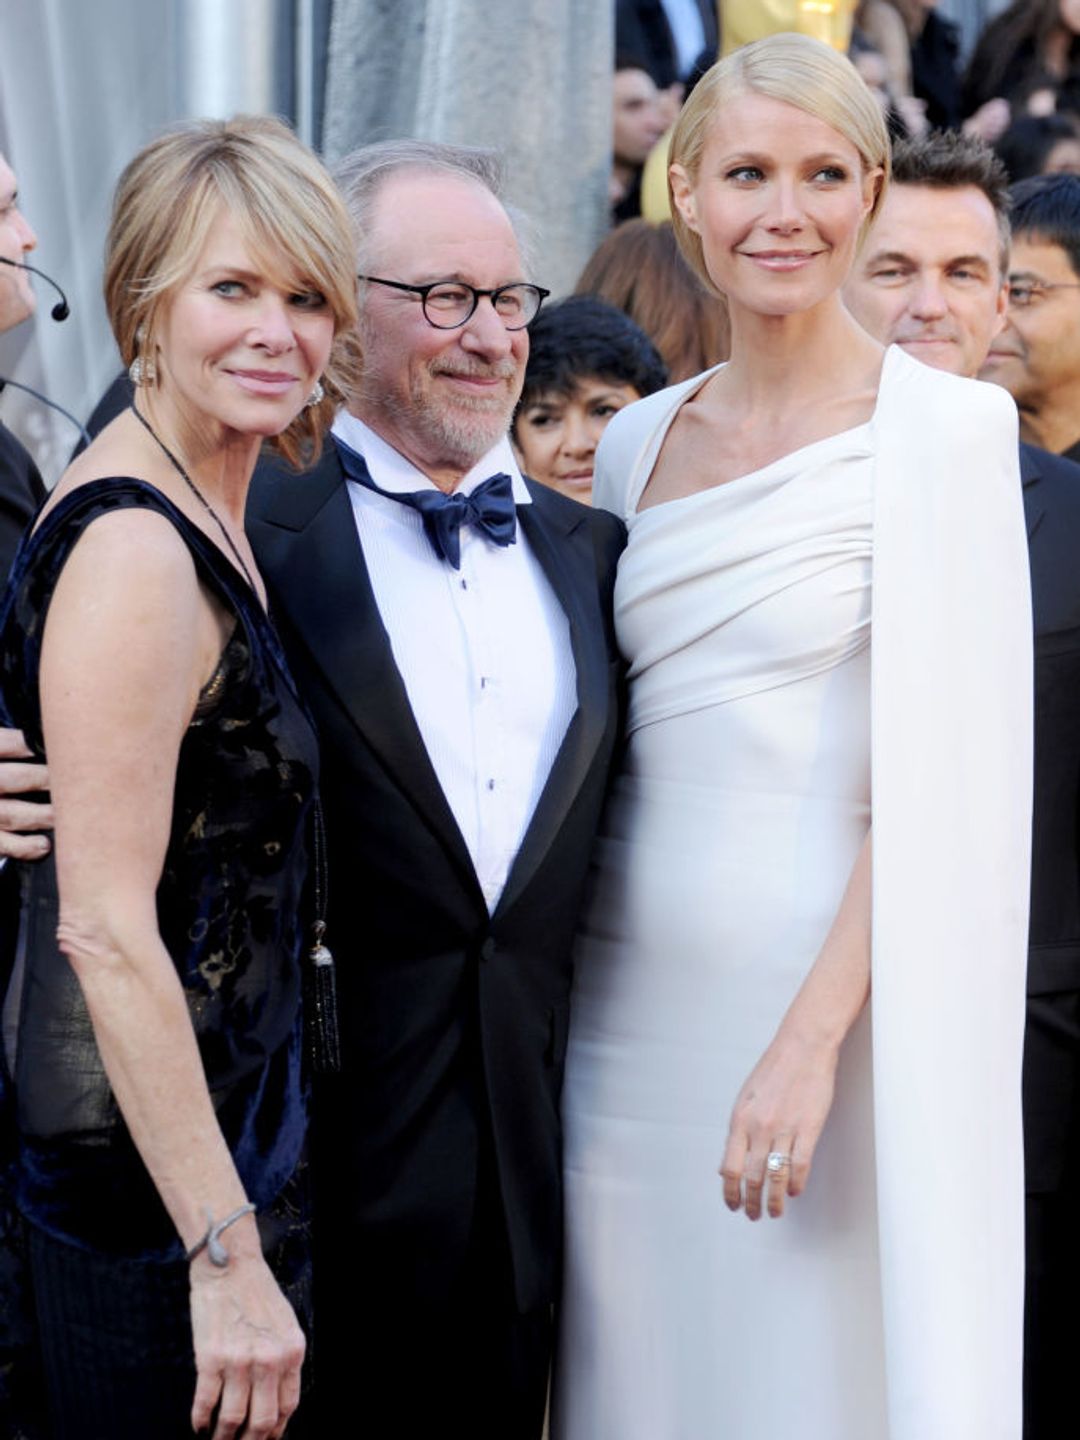 Actors Gwyneth Paltrow and Kate Capshaw and director Steven Spielberg arrive at the 84th Annual Academy Awards in 2012